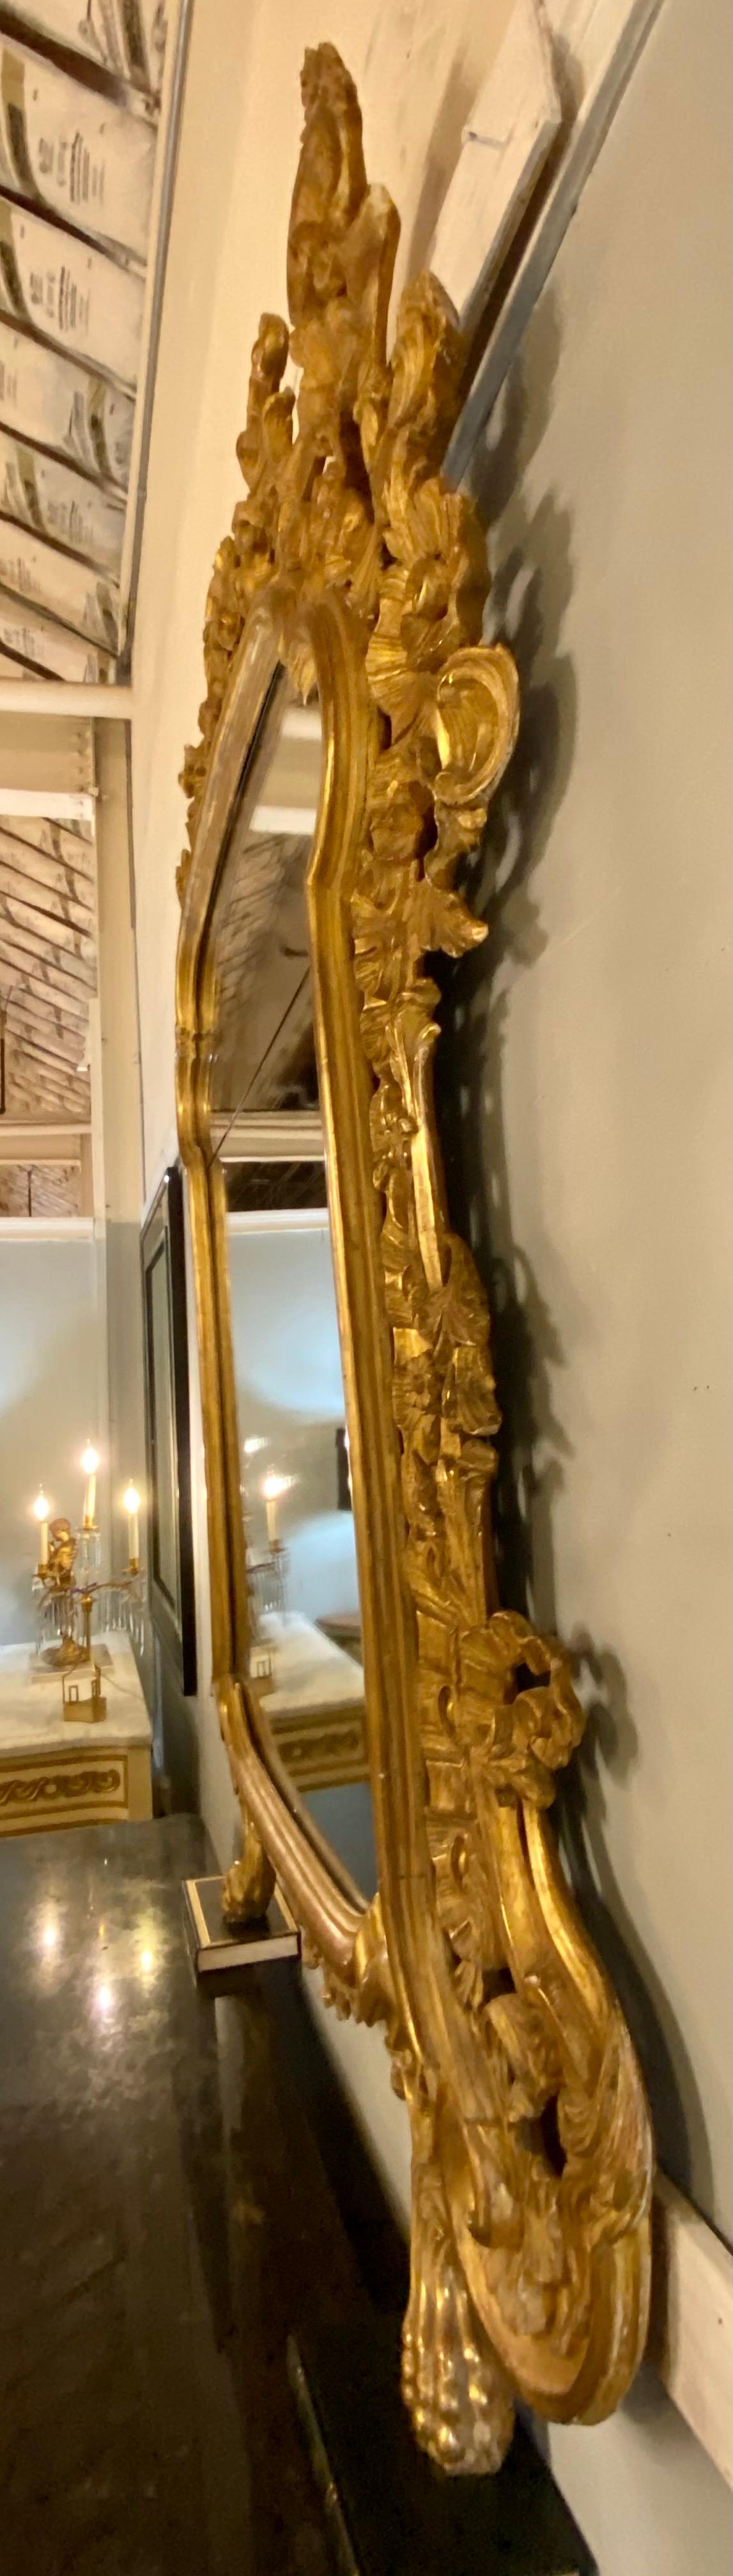 18th Century-Early 19th Century Giltwood Mirror, over the Mantle Wall or Console 9